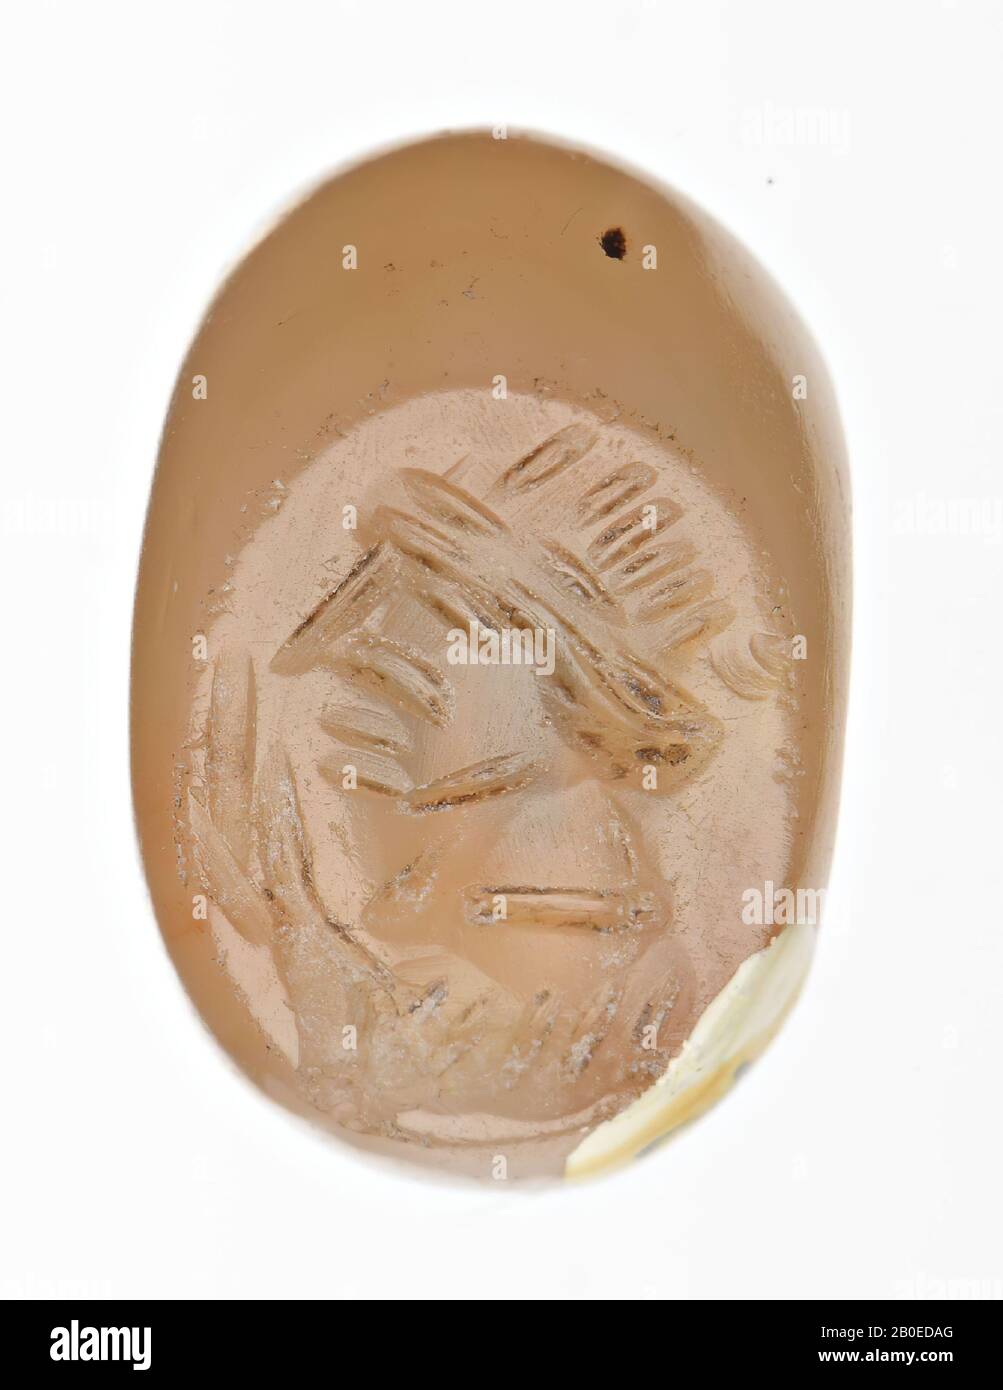 An ellipsoid stamp with an image of the face of a man., Seal, stone, carnelian, D 1.1 cm, H 0.8 cm, D hole 0.5 cm, Iran Stock Photo